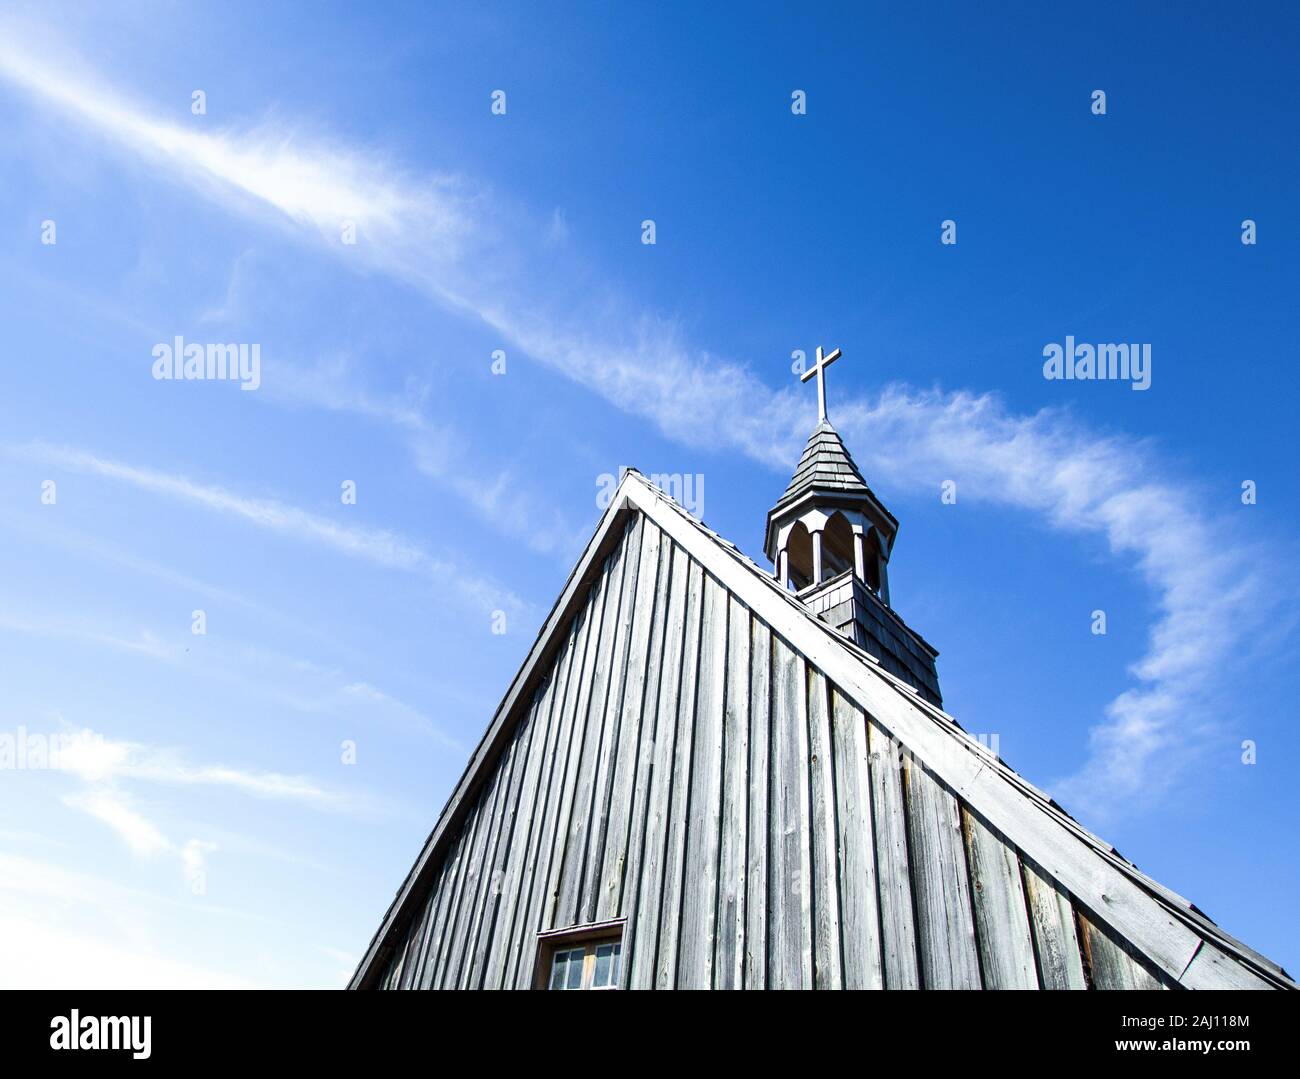 Church Steeple And Copy Space. Church steeple with wooden cross set against a blue sky with clouds and chem trails. Stock Photo